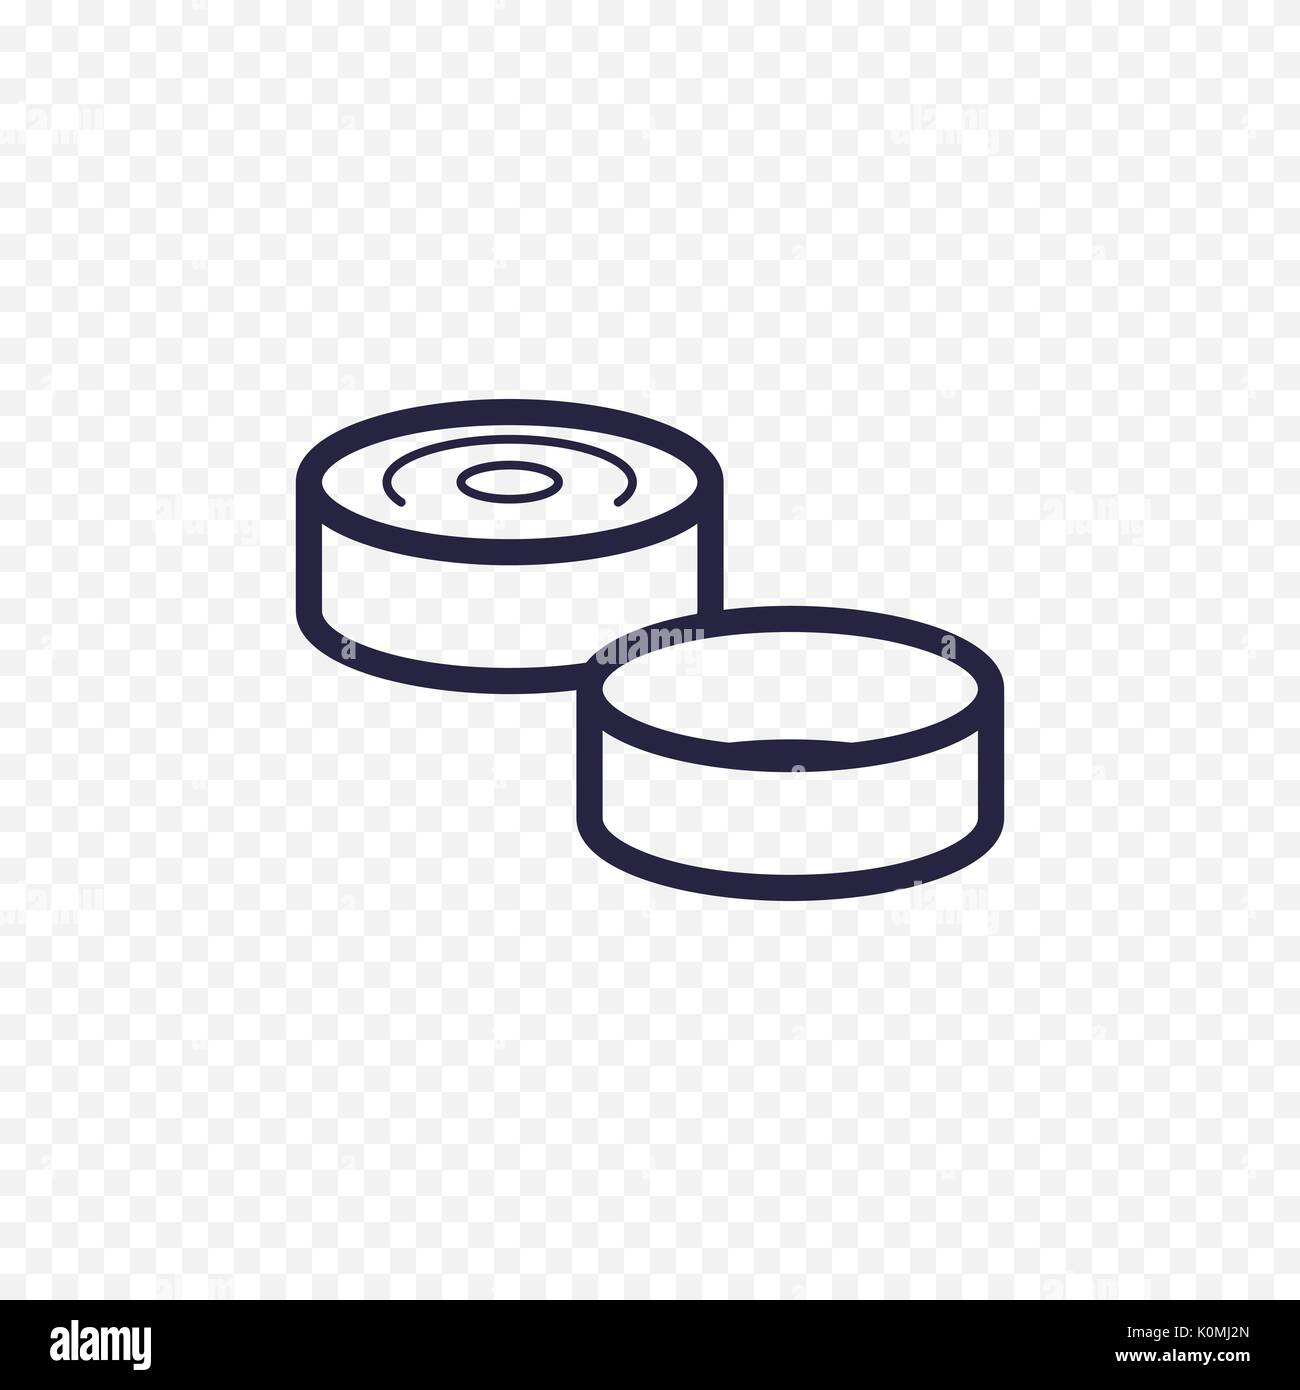 Game of checkers line icon. Checkers figure thin linear signs for websites, infographic, mobile app. Stock Vector